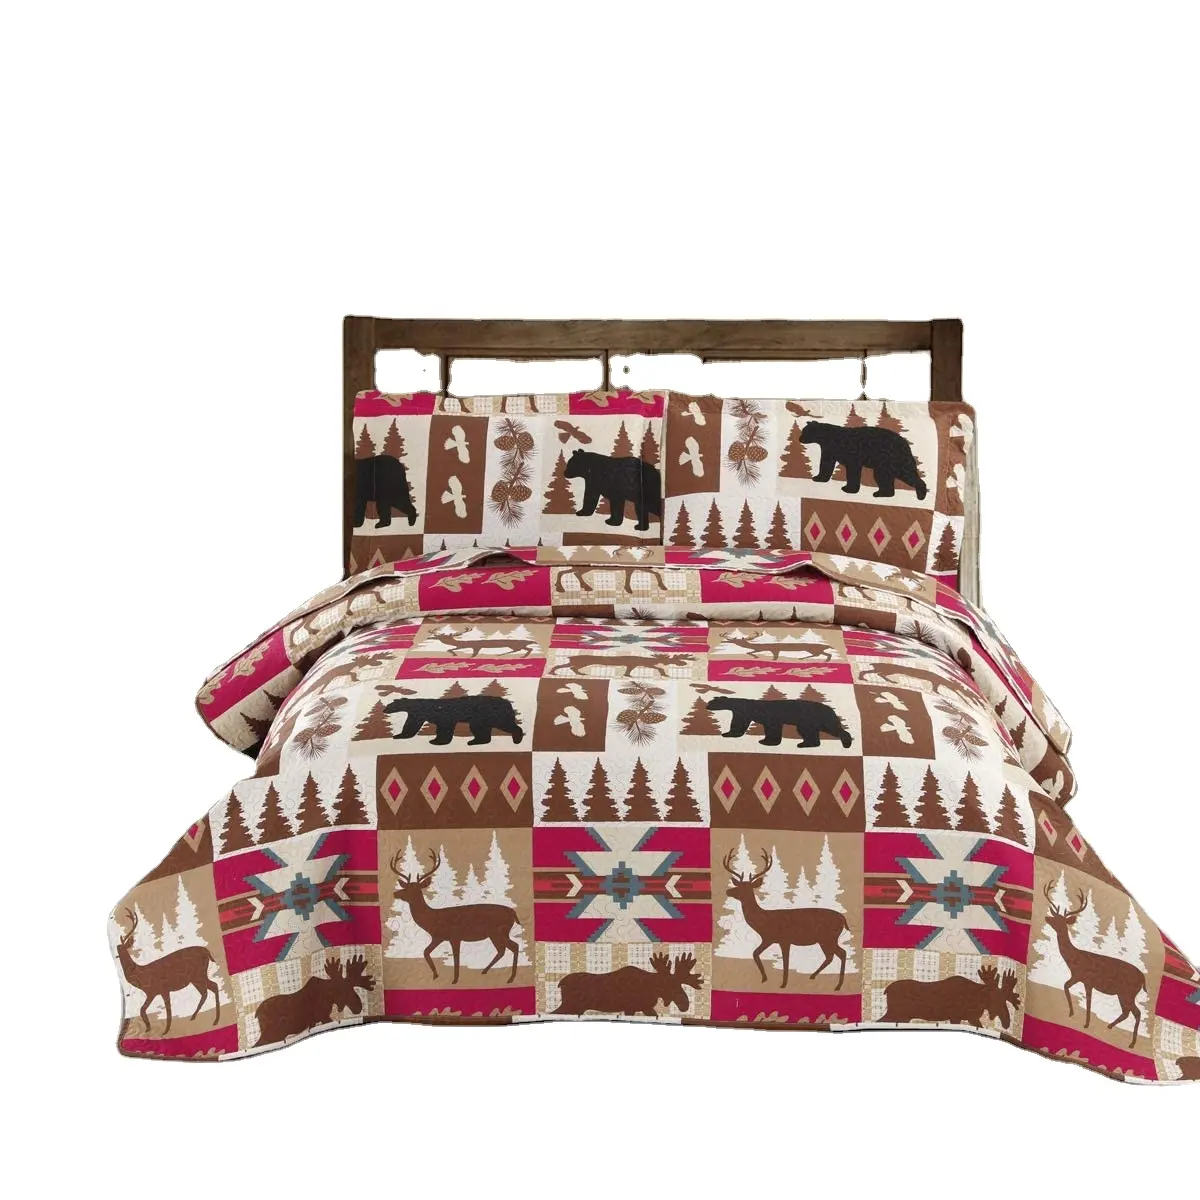 Rustic Cabin Bedding Cover Reversible Coverlet Moose Deer Wildlife Patchwork Plaid Quilts Set Black Bear Country Decor